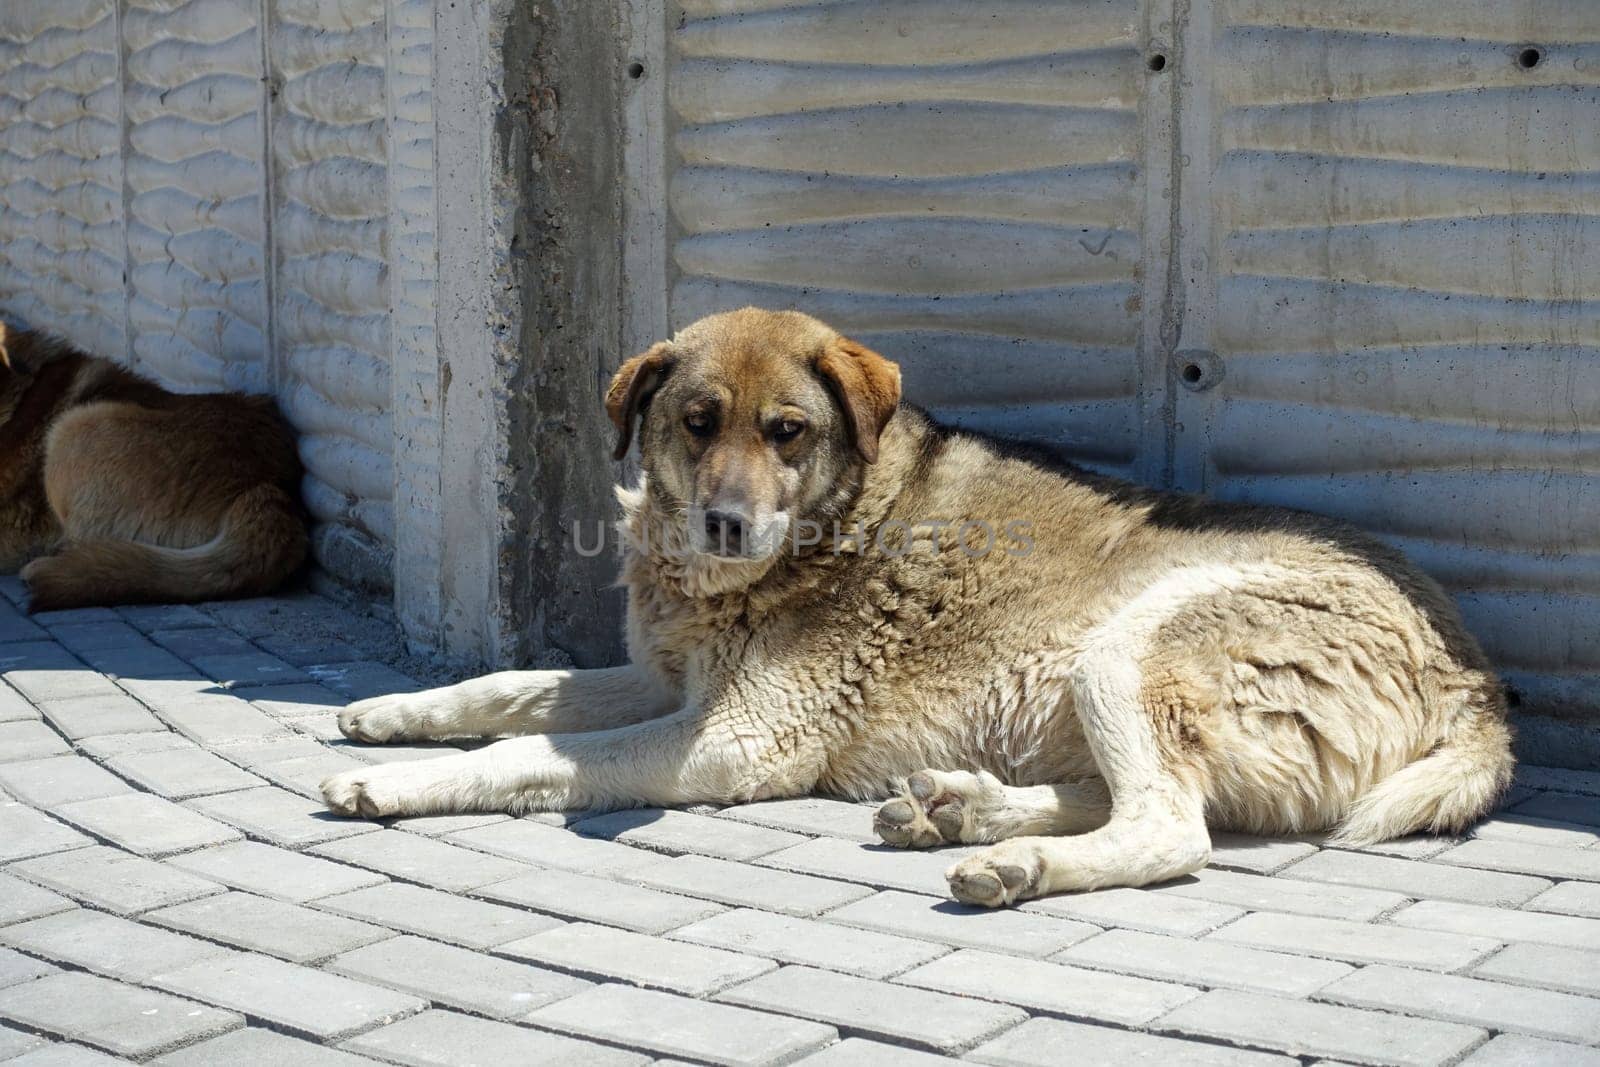 stray dogs lying on street pavements, tired dog breathing fast, by nhatipoglu